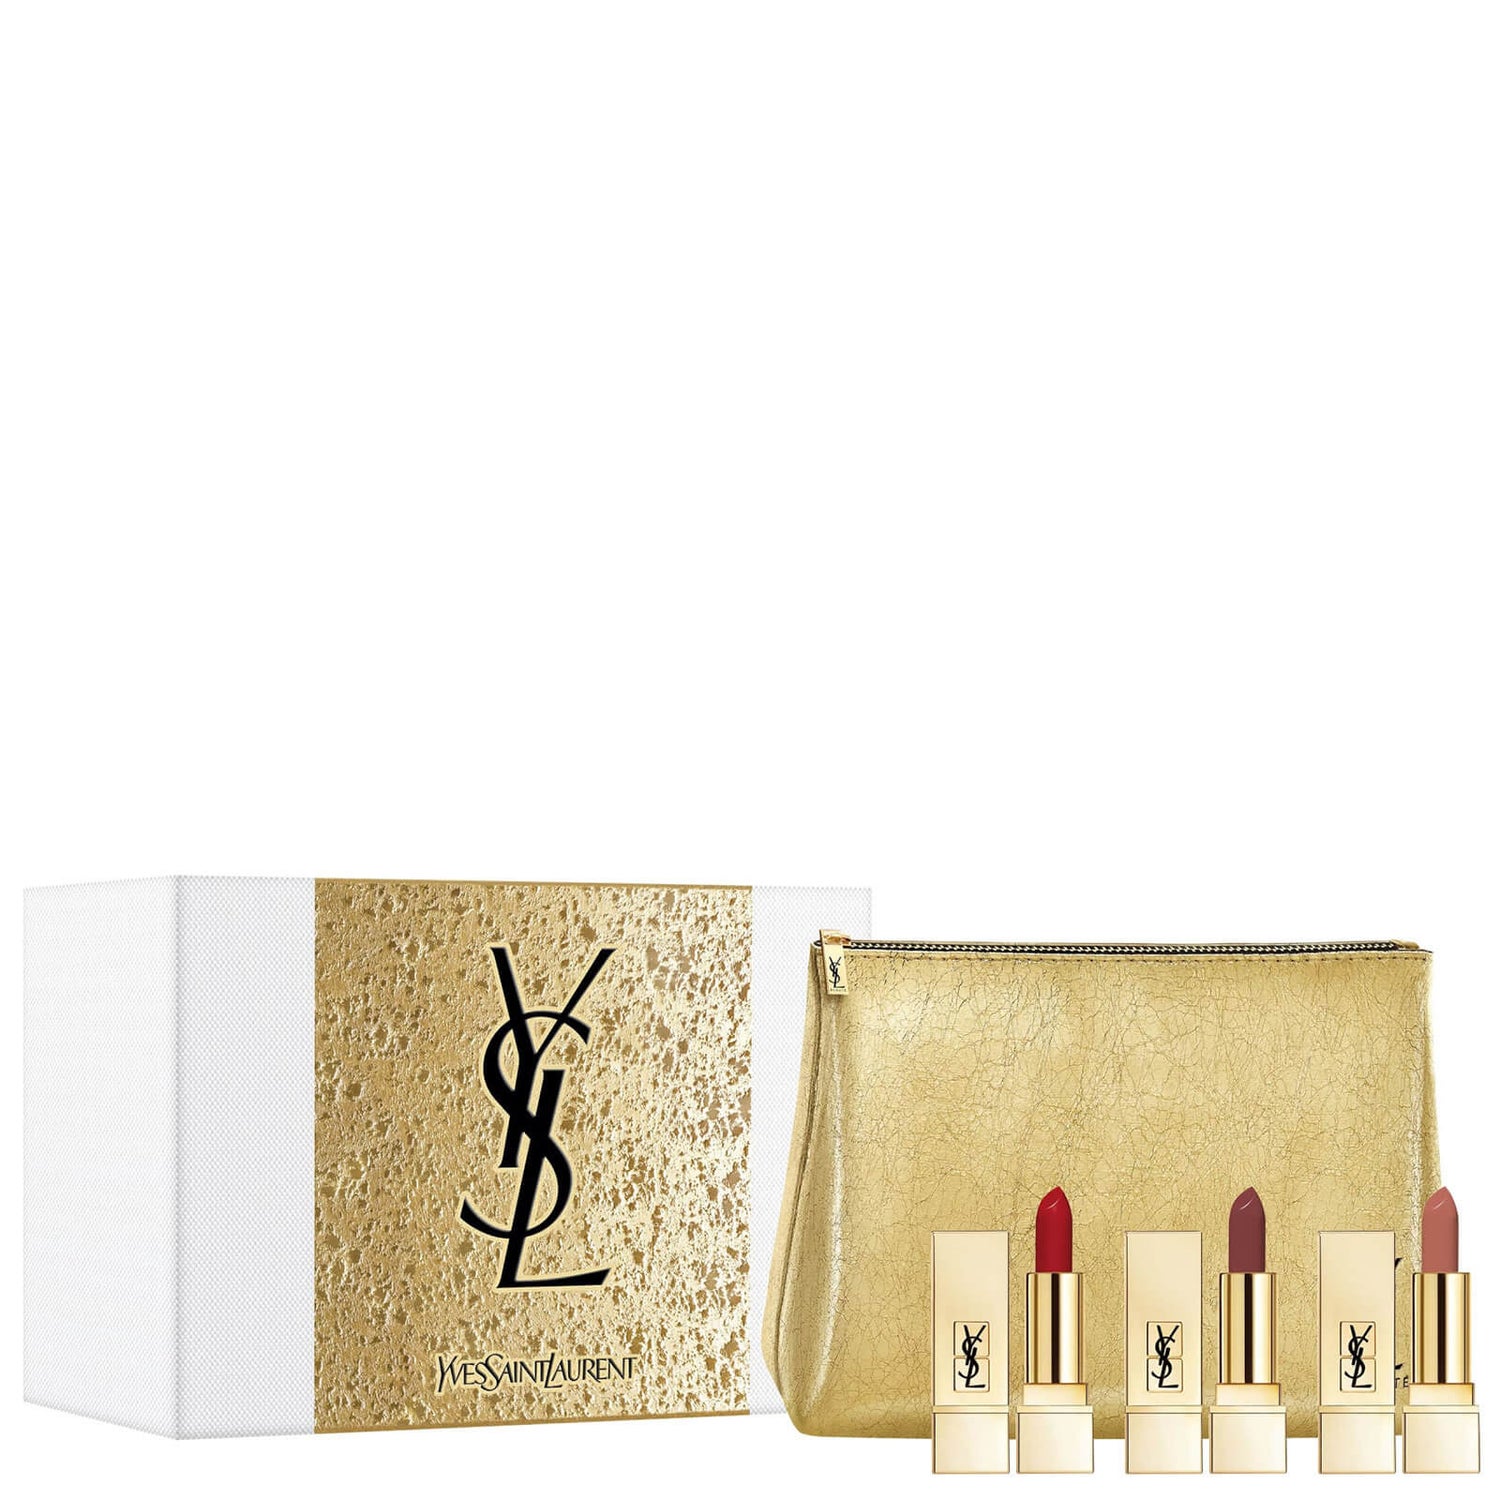 Yves Saint Laurent Kiss and Couture Lipstick Trio Set